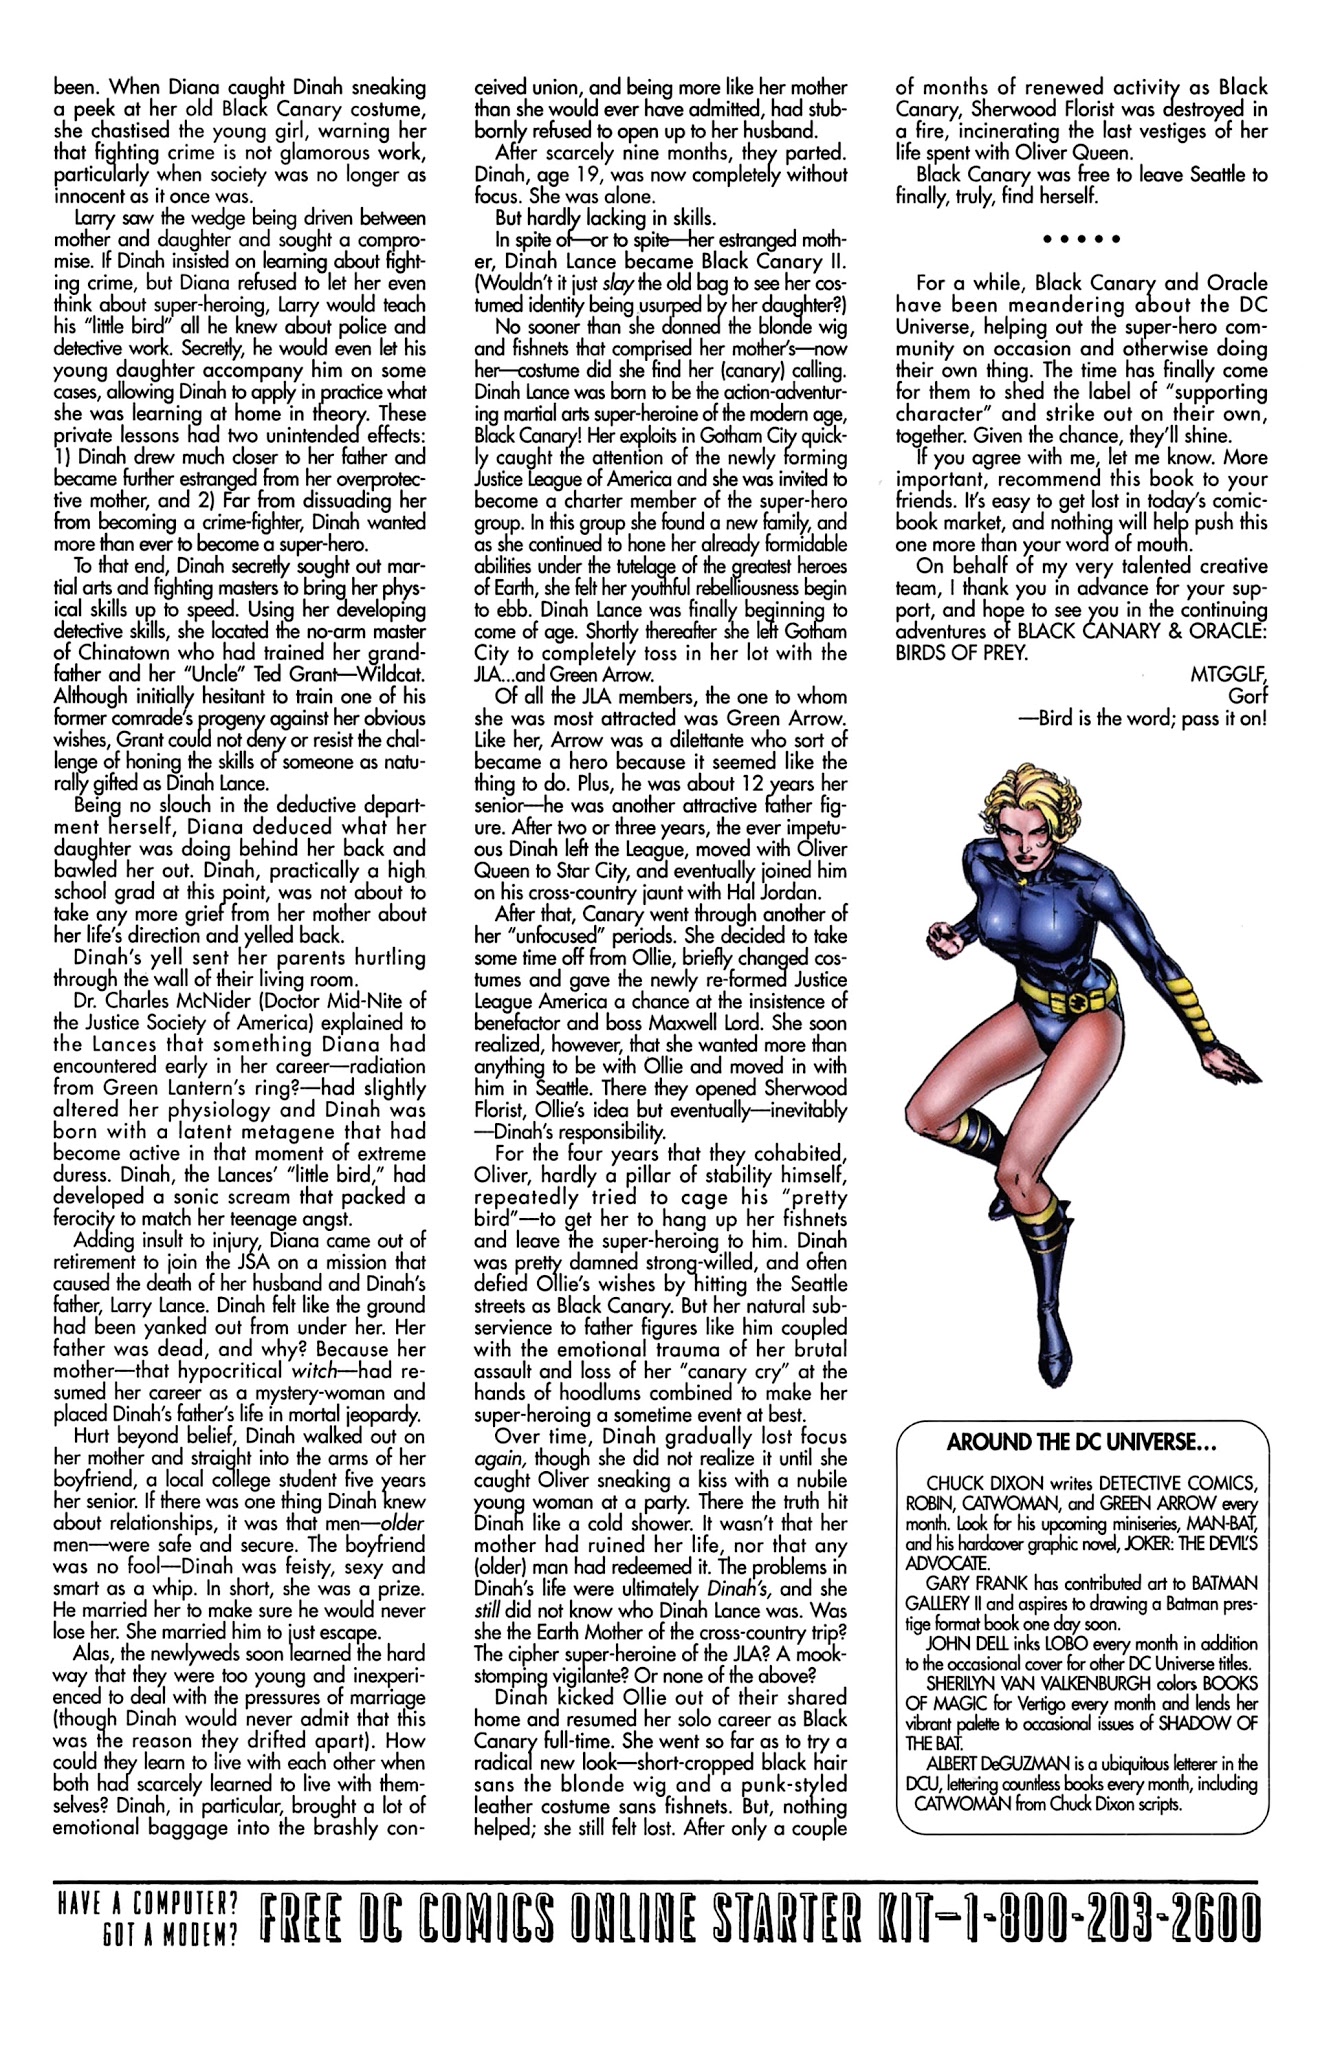 Read online Black Canary/Oracle: Birds of Prey comic -  Issue # Full - 56